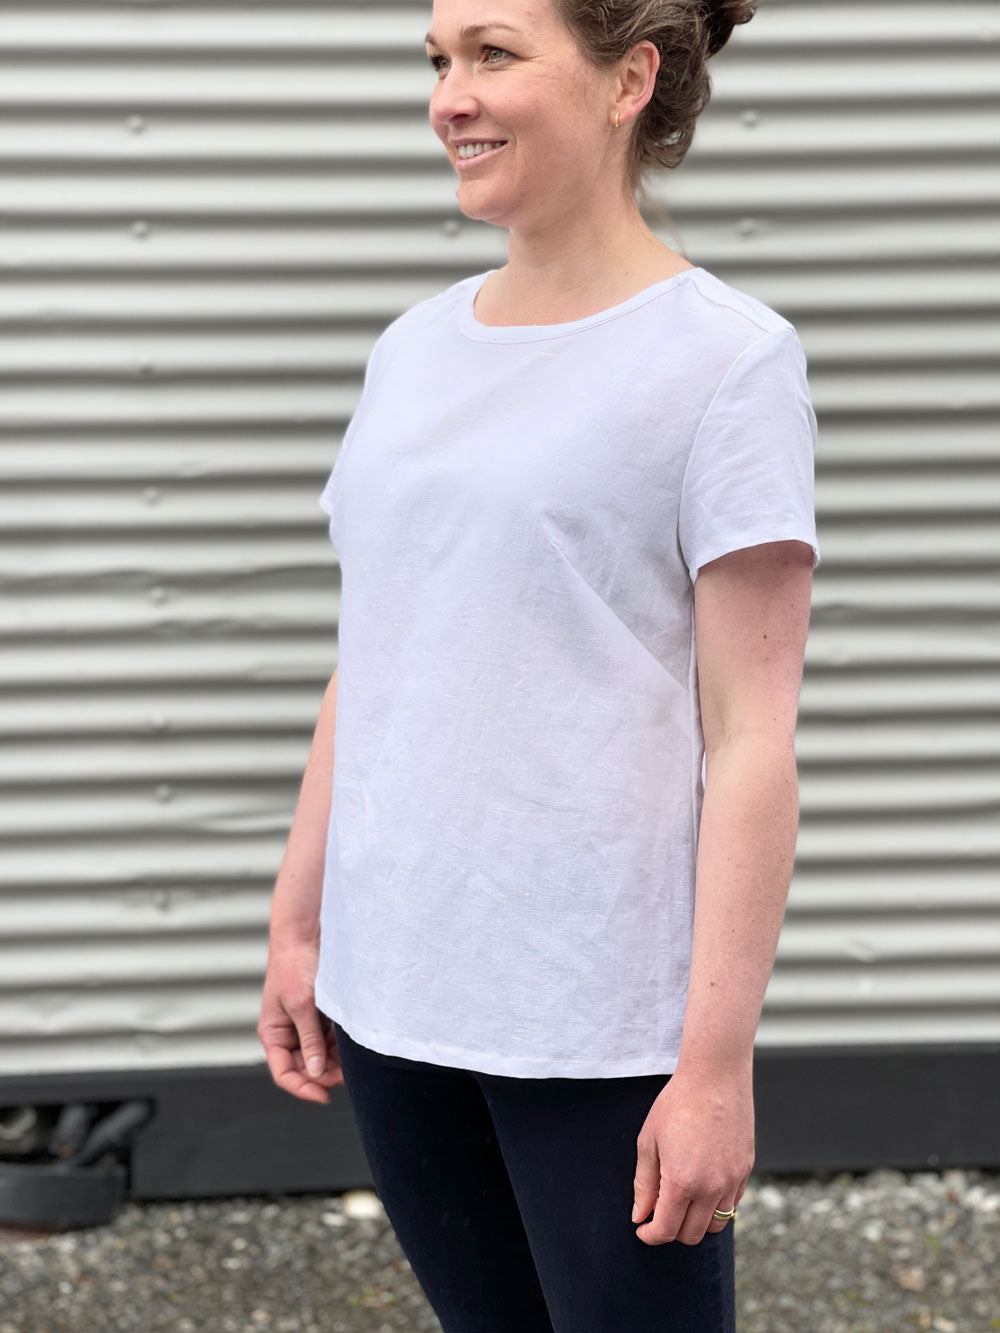 a white woman wearing a white t-shirt and black jeans with a side on shot against a corrugated iron background 